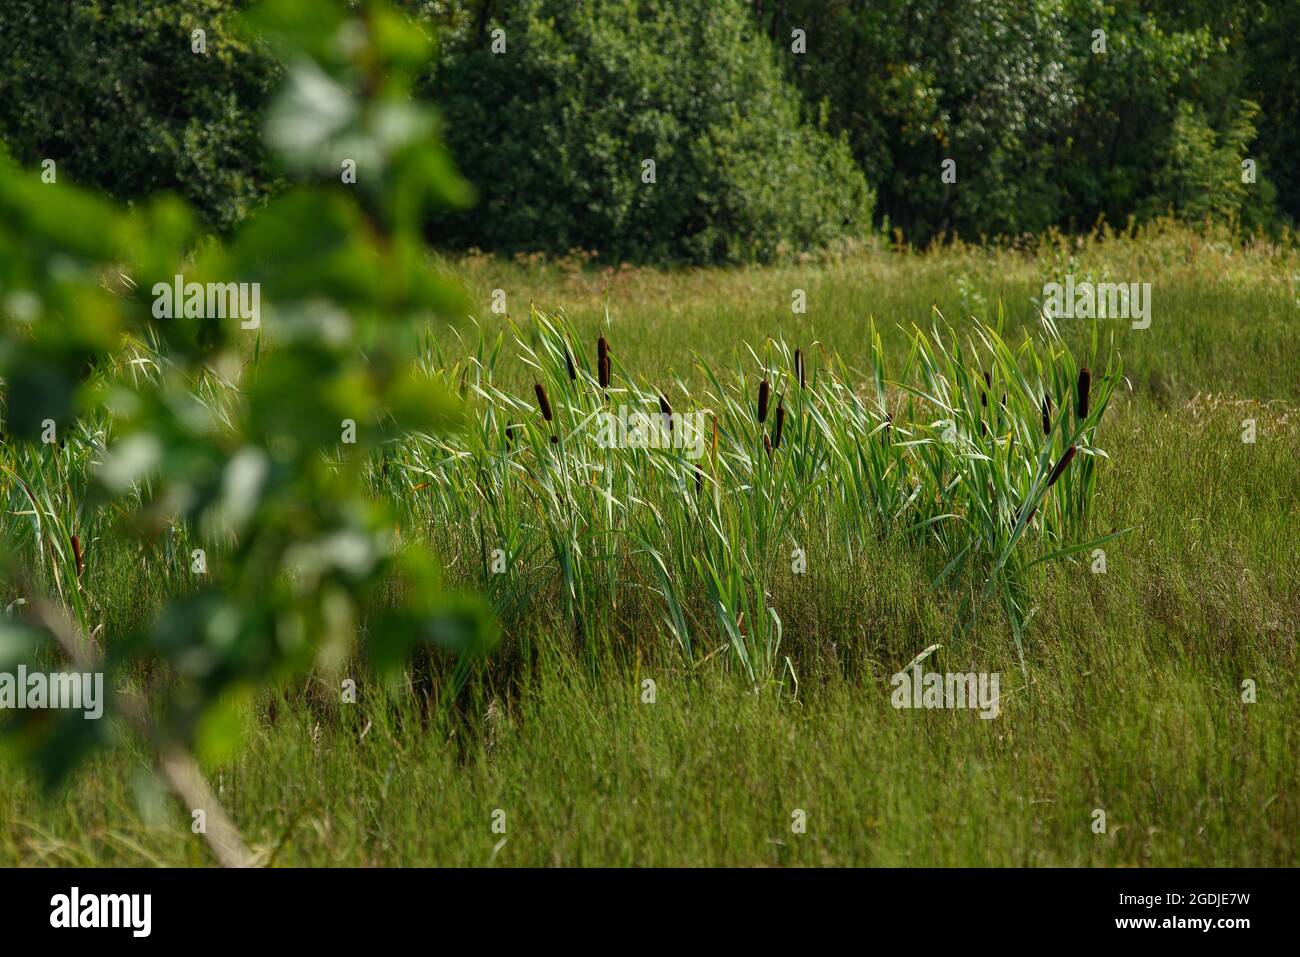 Reeds on a swampy area in tall grass. Stock Photo